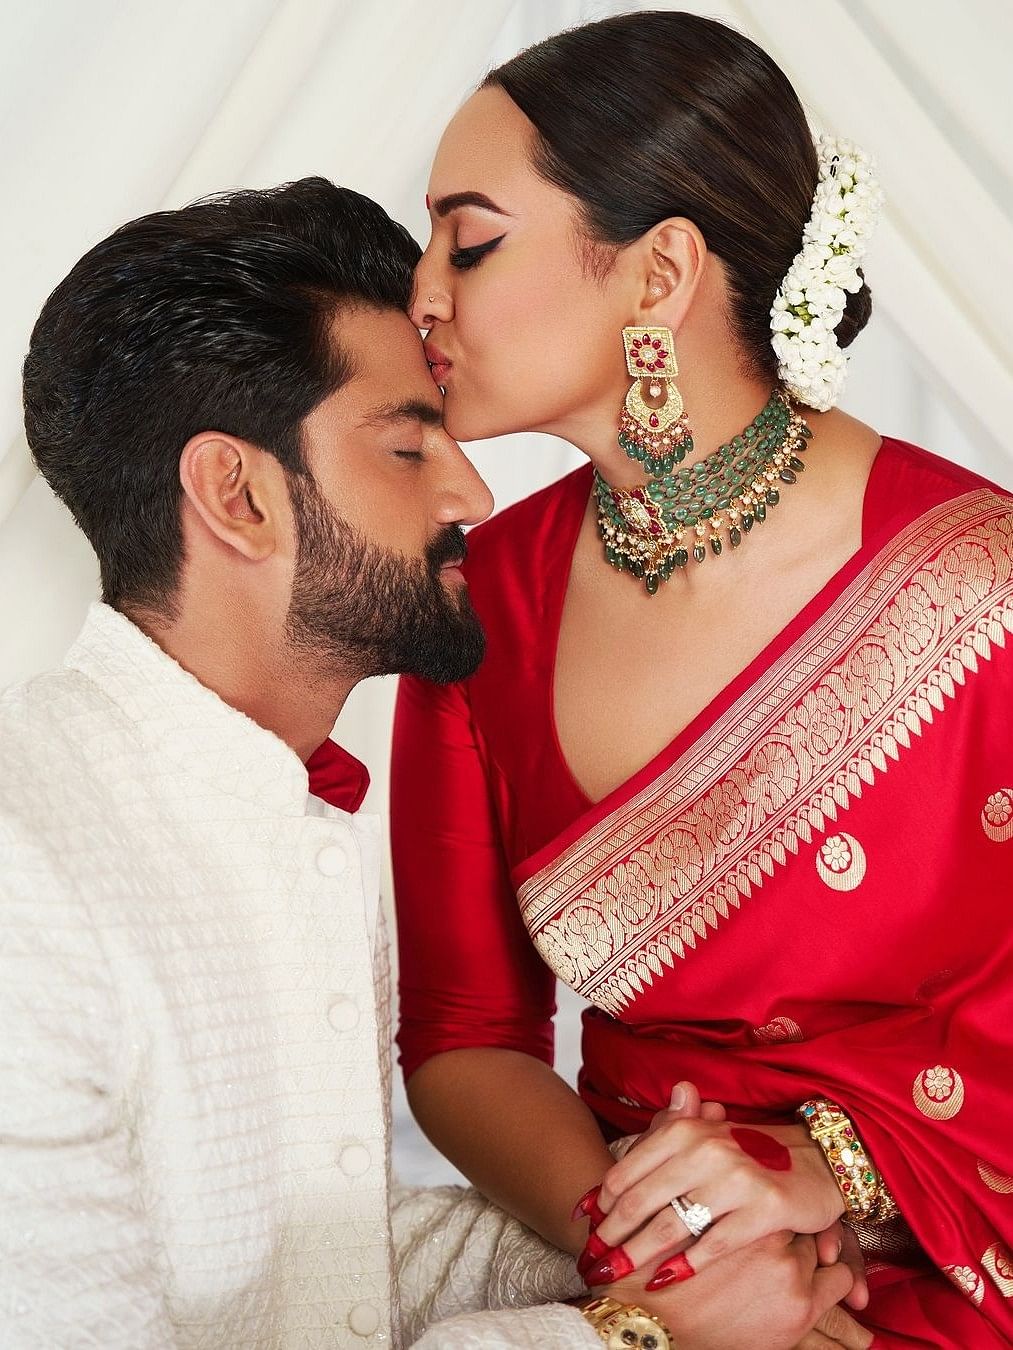 The love birds opted for a private ceremony to tie the knot on June 23 at Sonakshi’s residence, followed by a grand reception for their friends from the film industry.